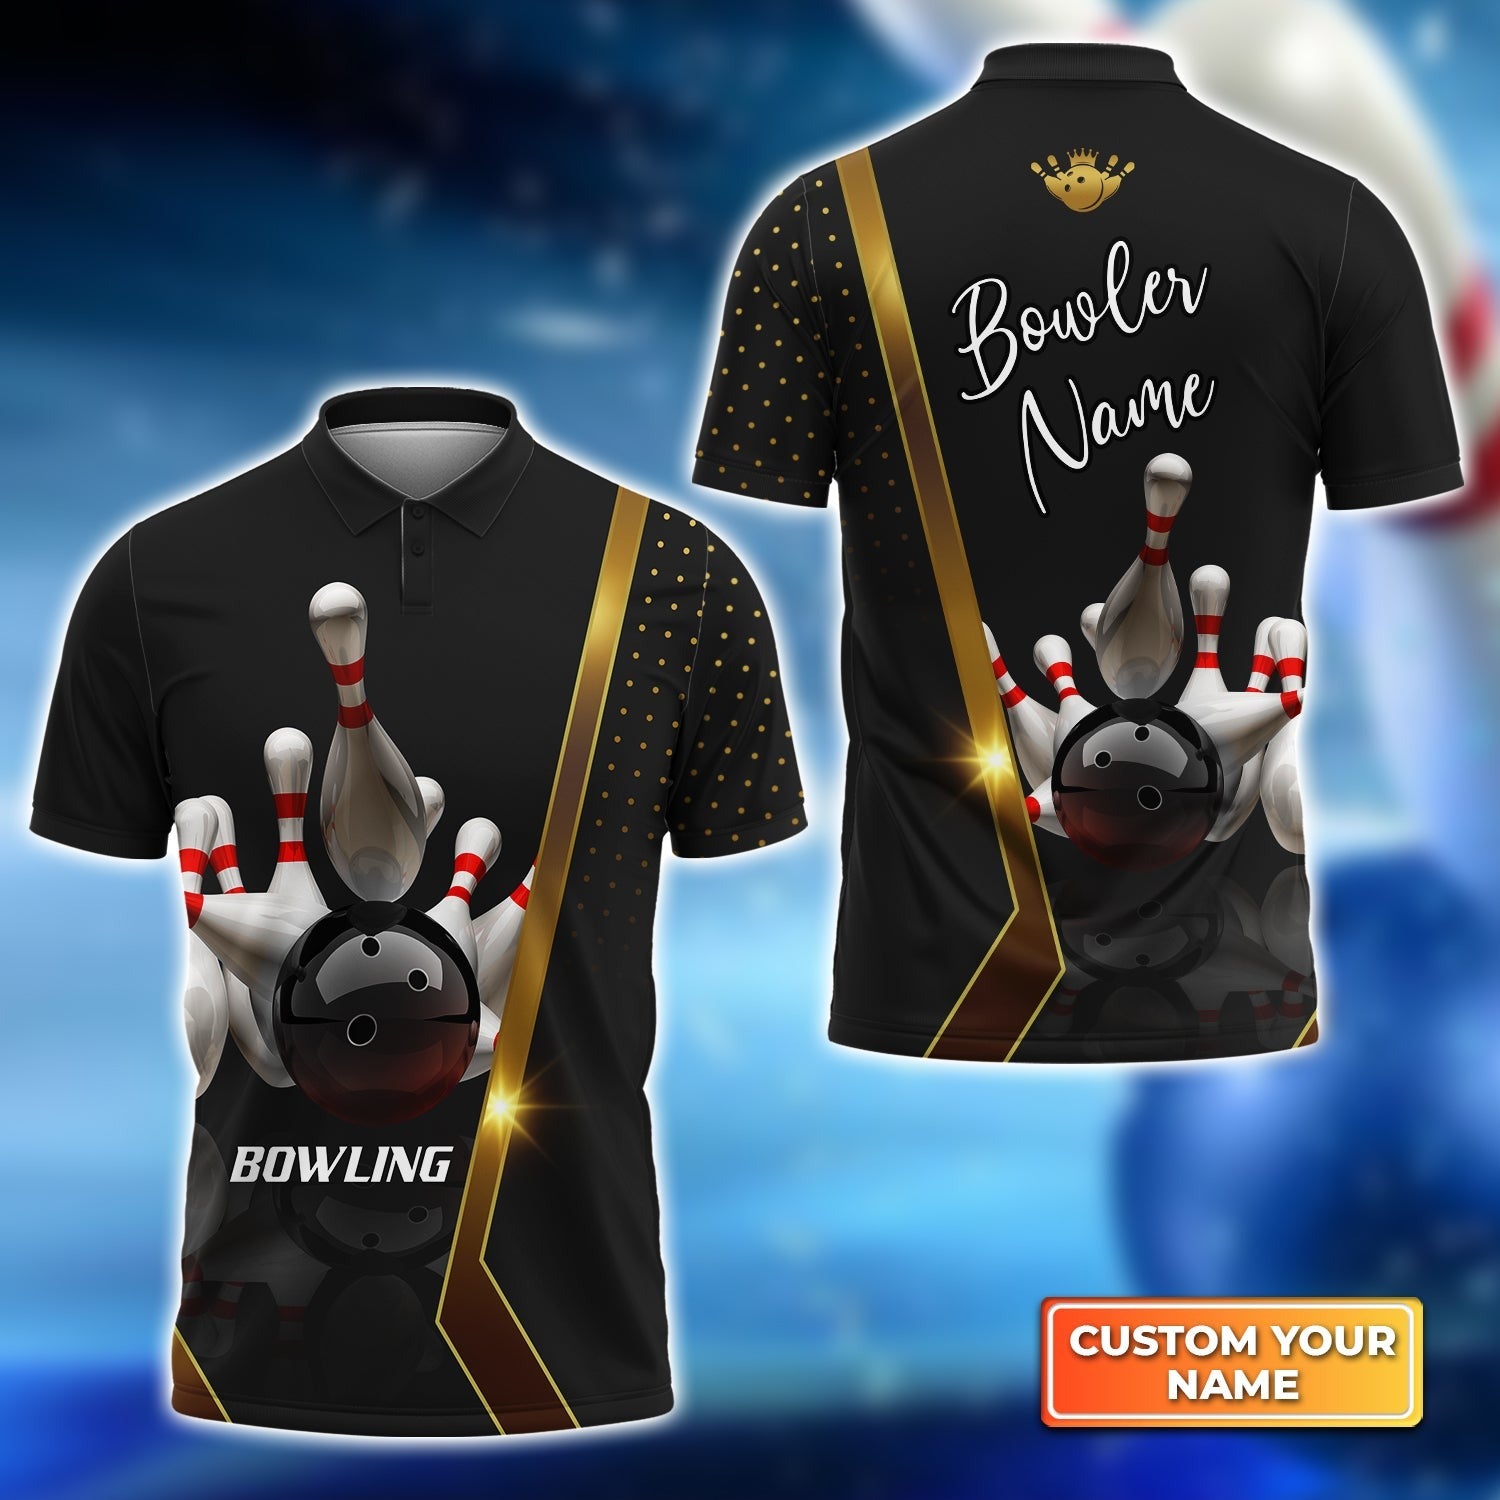 Customized Bowling Polo Shirt, Black And Golden Pattern Personalized Bowling Polo Shirt For Men - Gift For Bowlers, Bowling Lovers